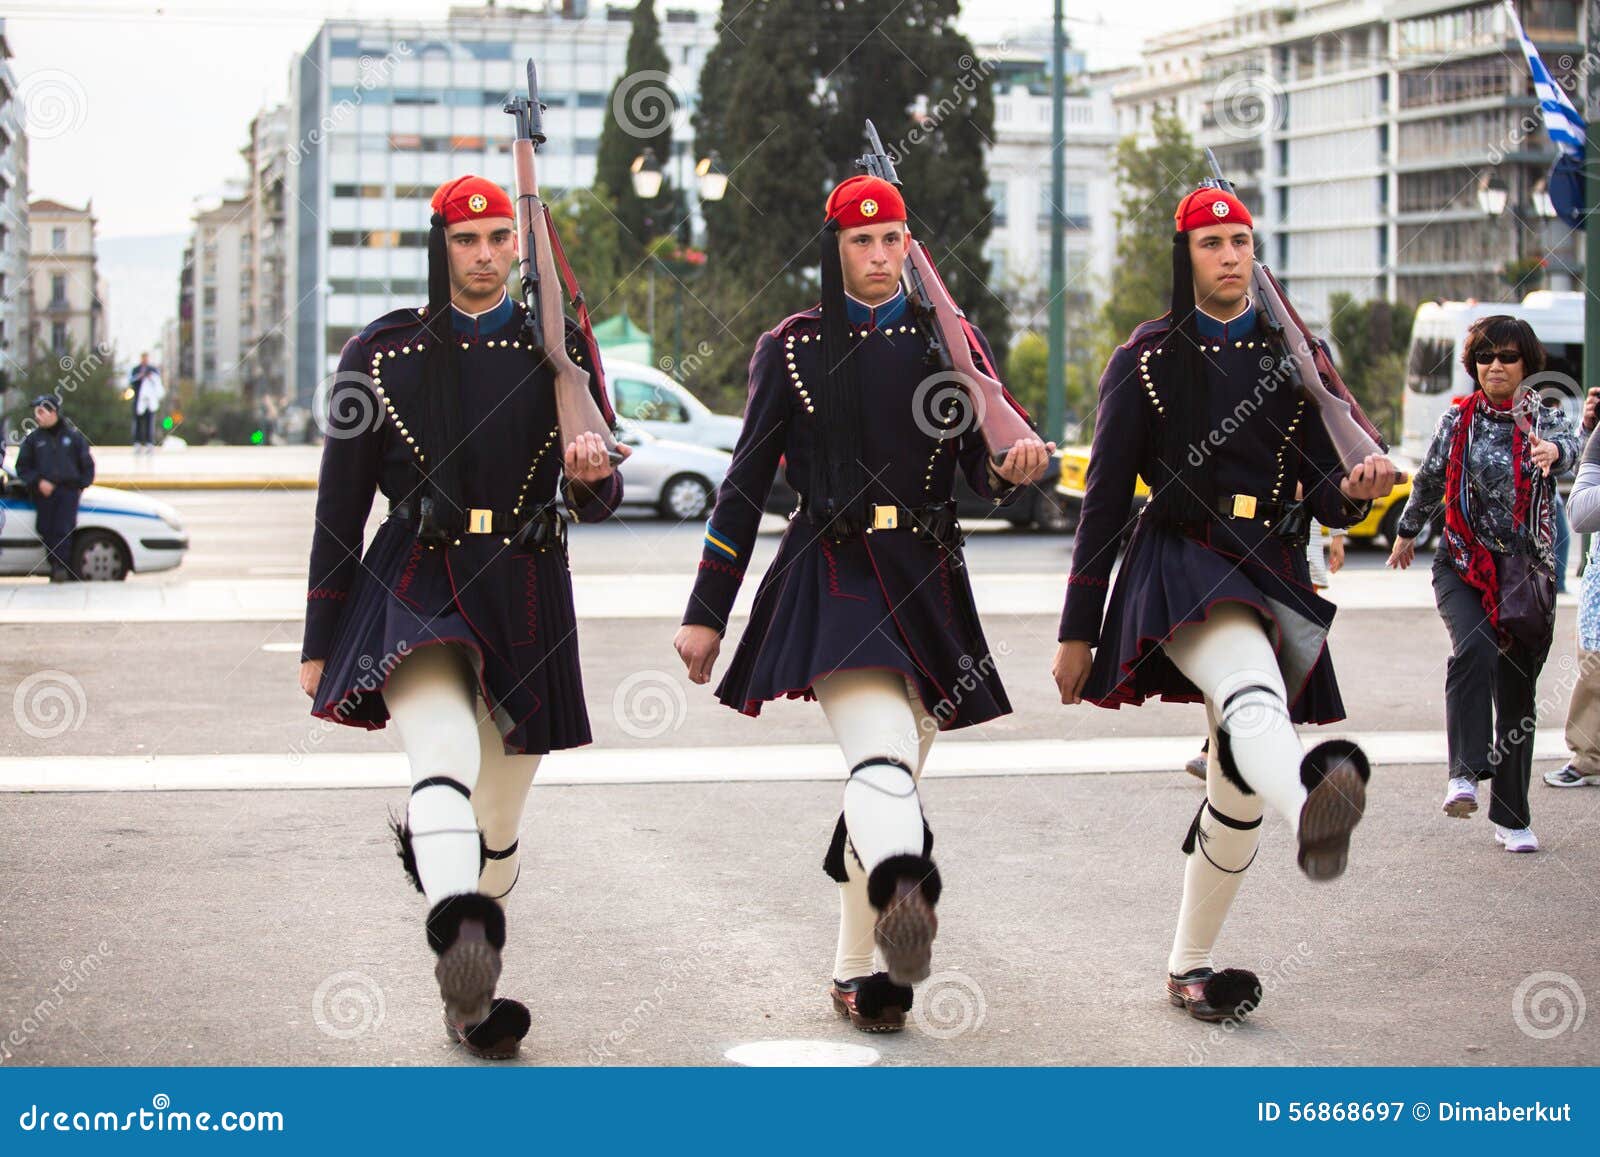 Housework ourselves Contradiction Greek Soldiers Evzones Dressed in Full Dress Uniform, Refers To the Members  of the Presidential Guard Editorial Photography - Image of capital,  building: 56868697